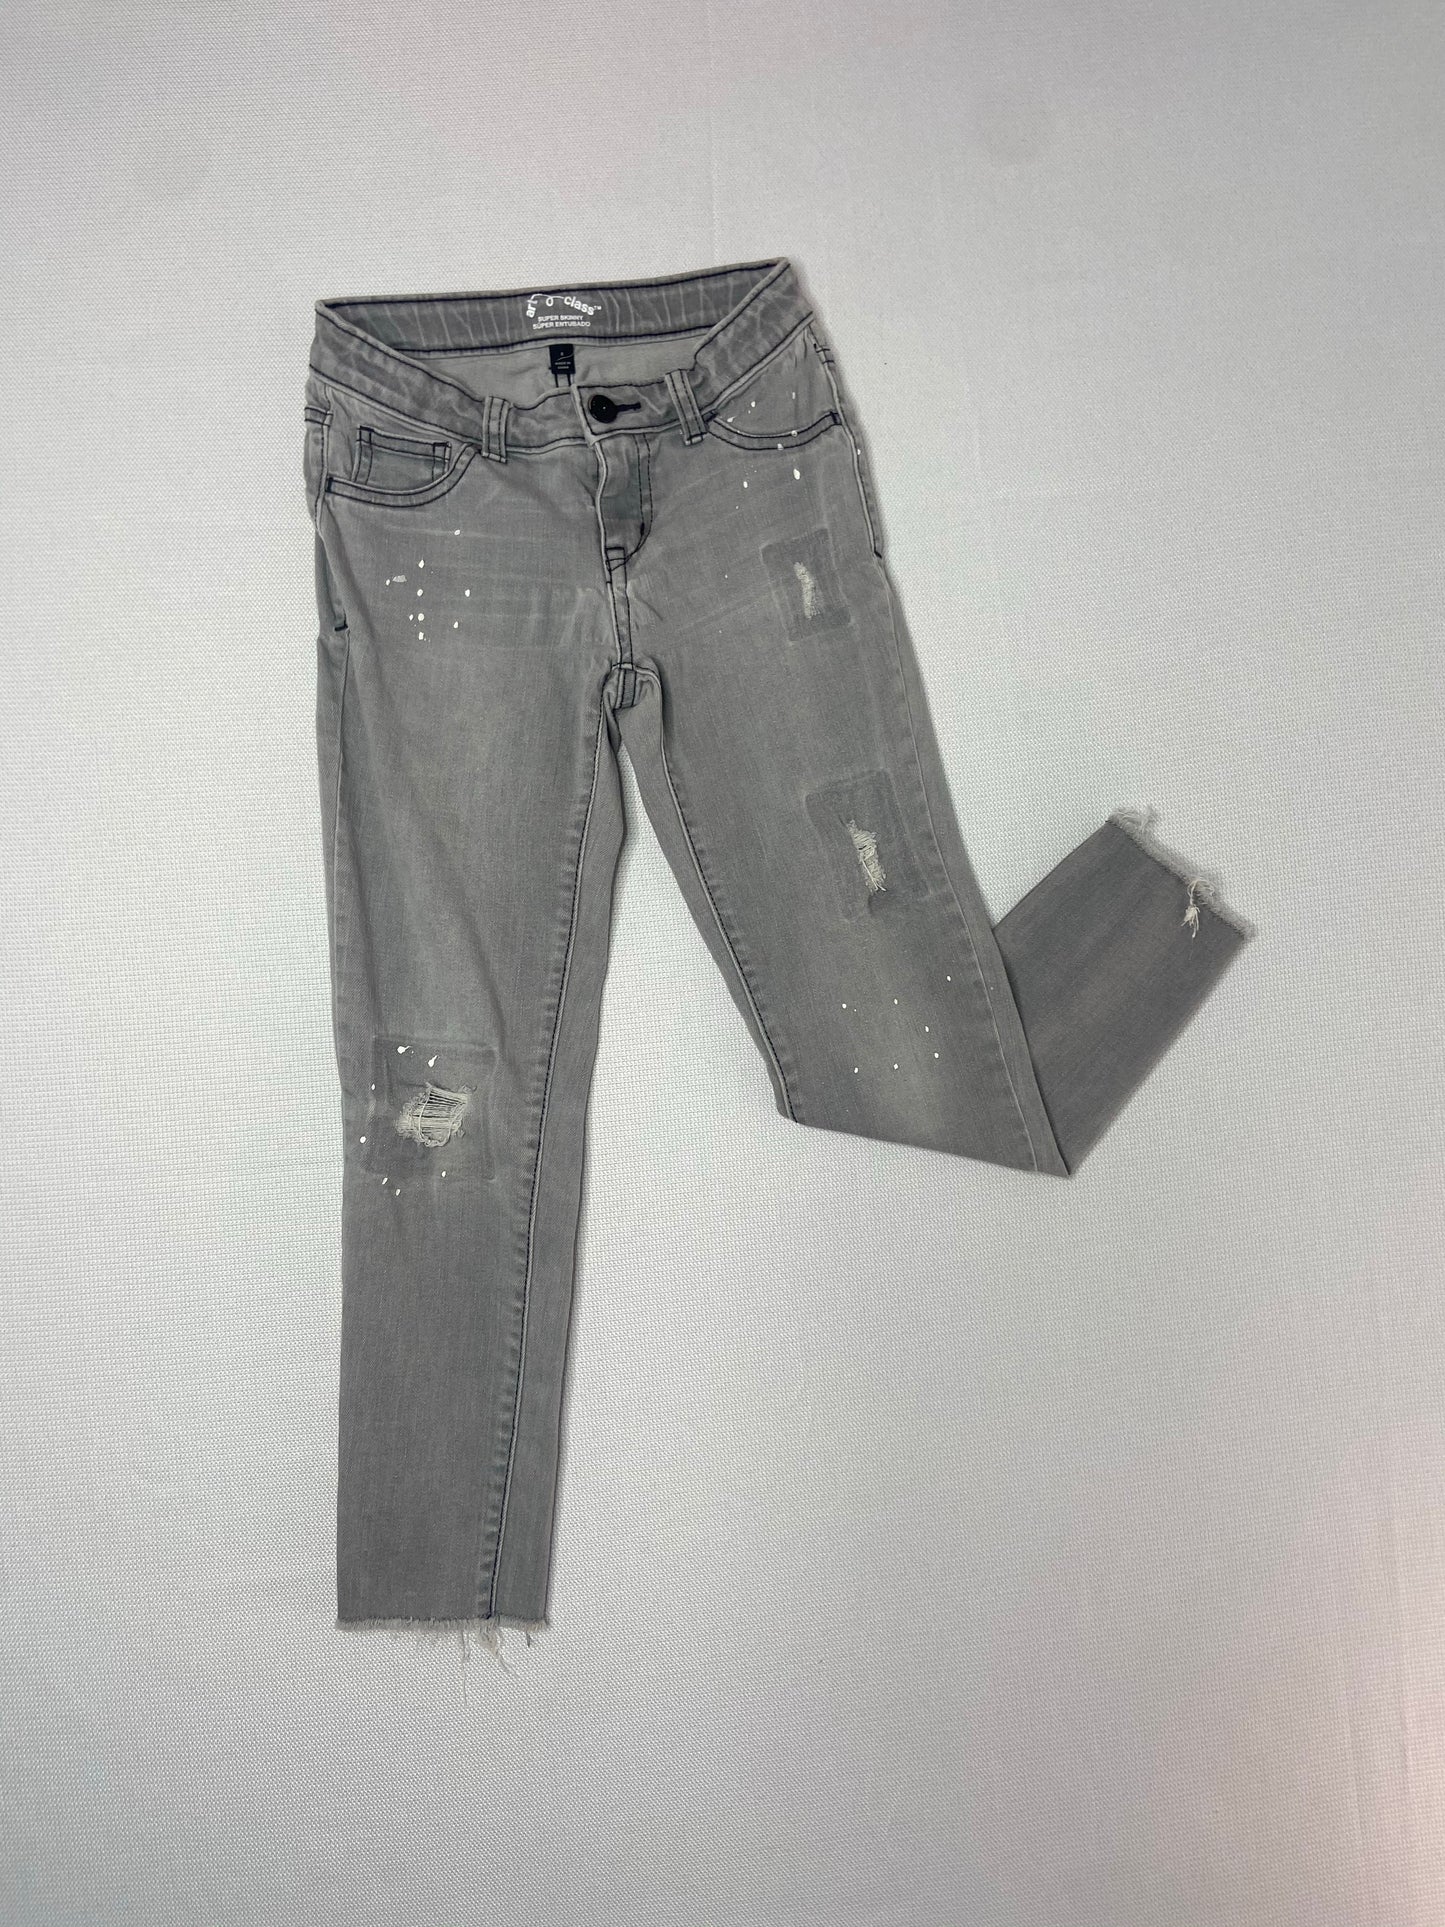 Gray Wash Distressed Jeans Super Skinny- Youth S (8)